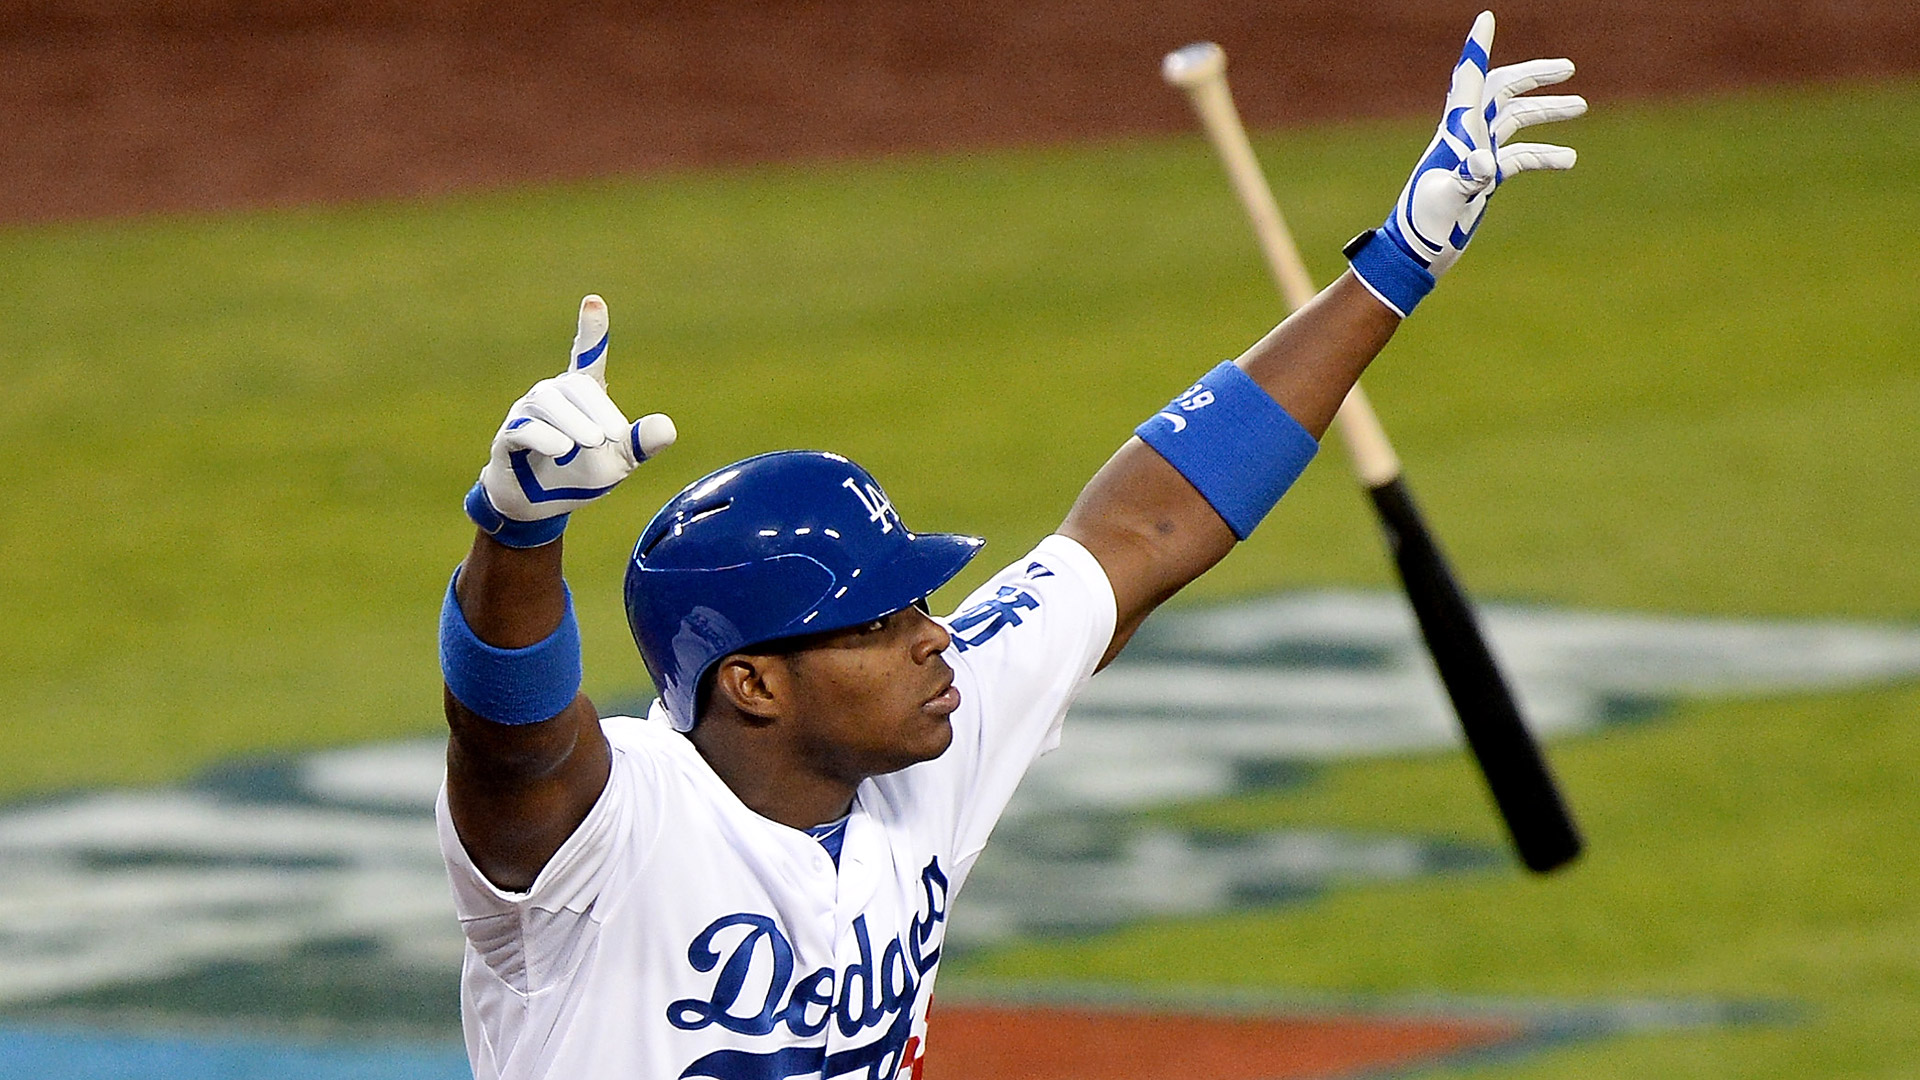 Yasiel Puig made his mark on Game 3 in a must-win for the Los